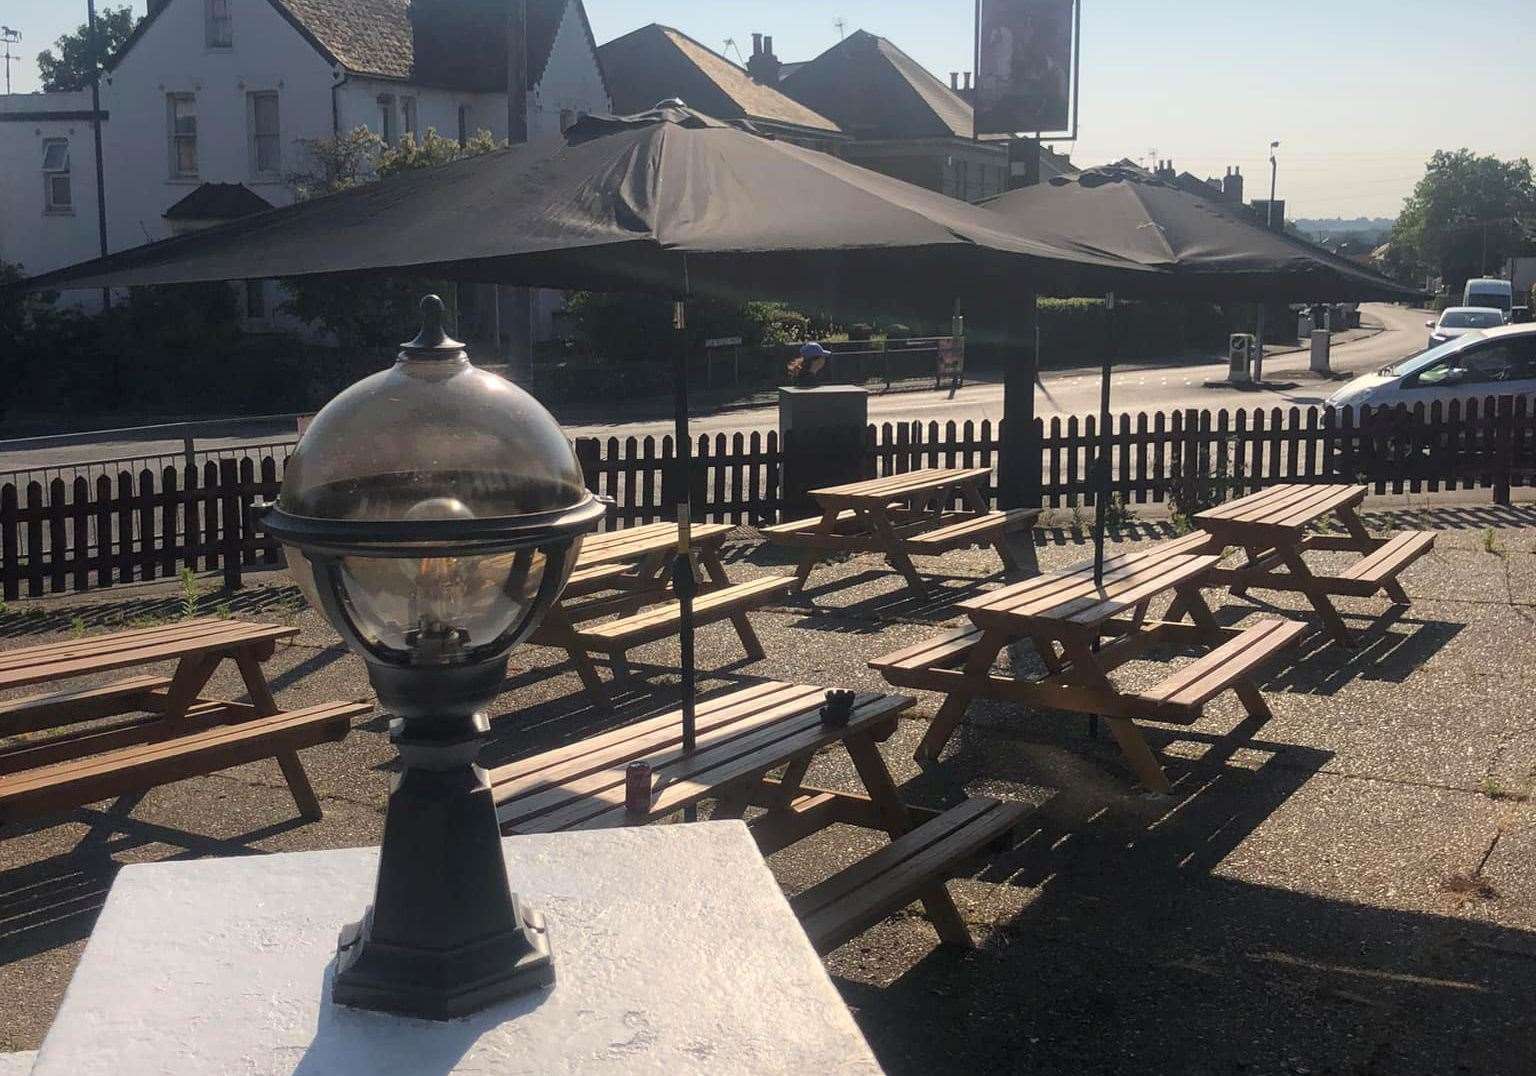 The pub garden at the Prince of Orange in Gravesend has had a makeover